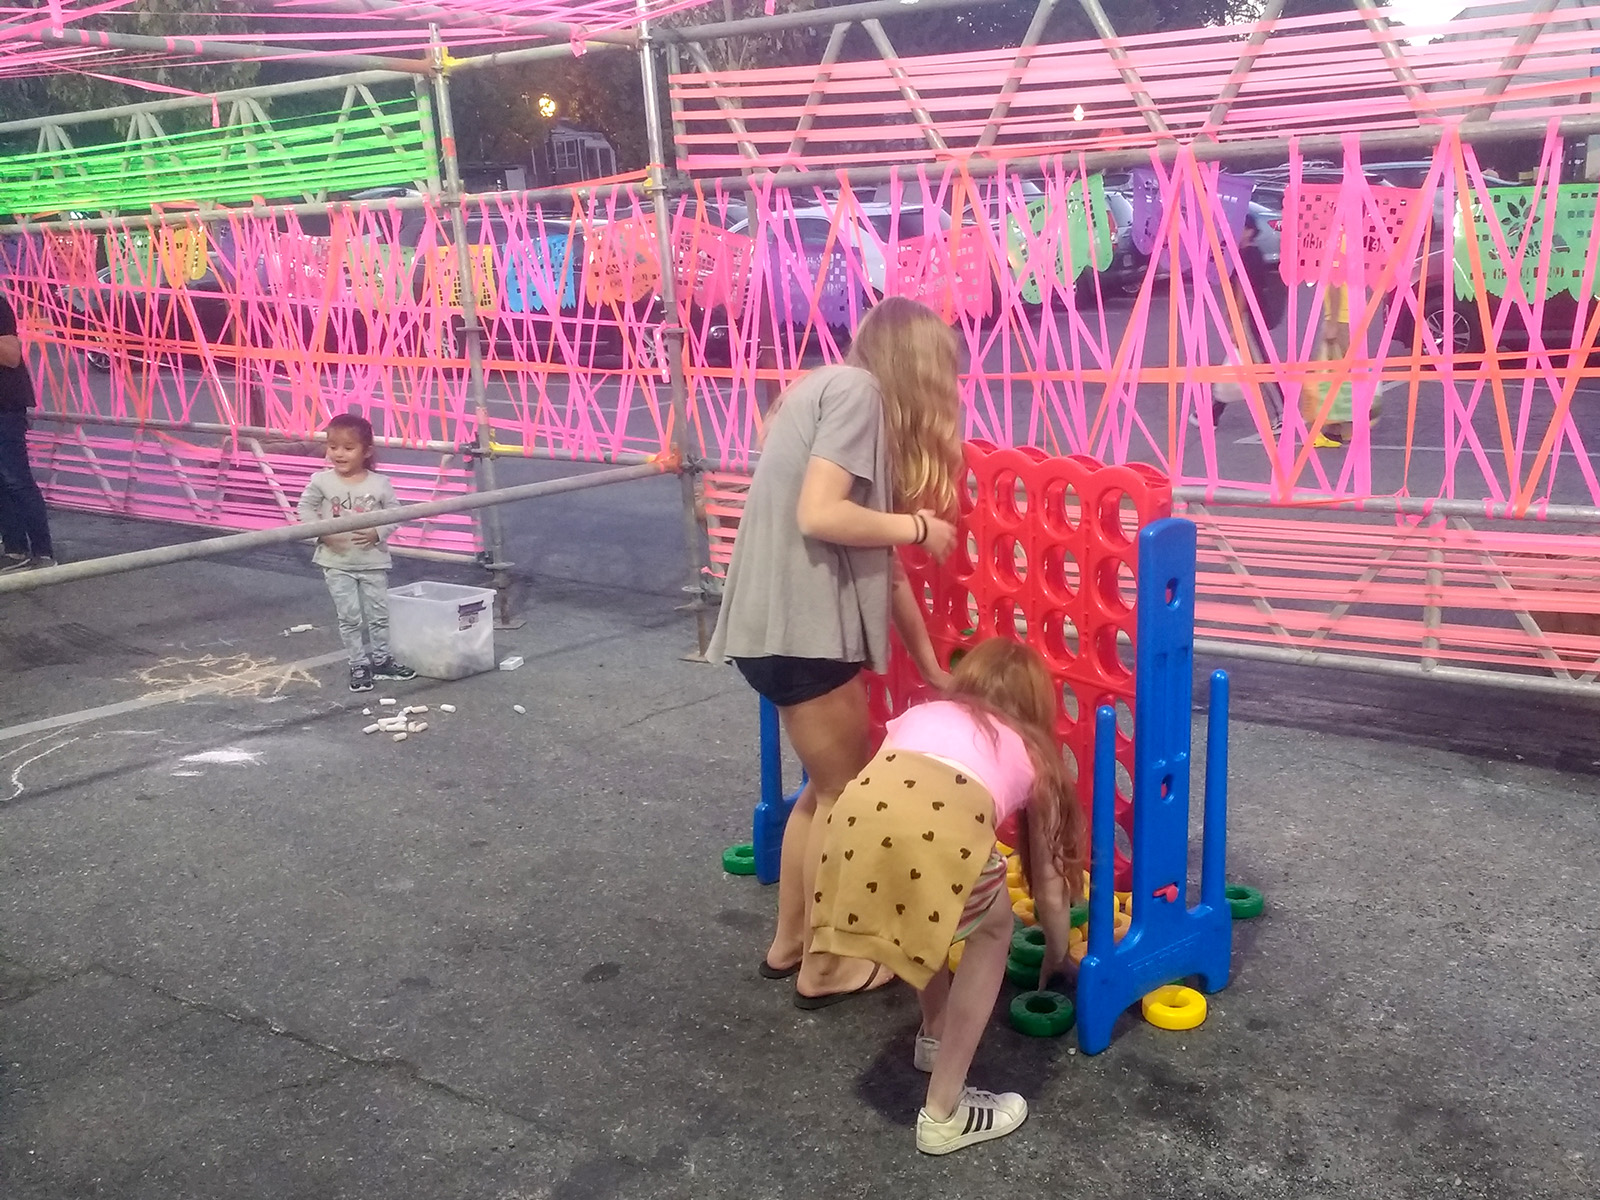 Woman and young girl play Connect Four in Friendship Lane